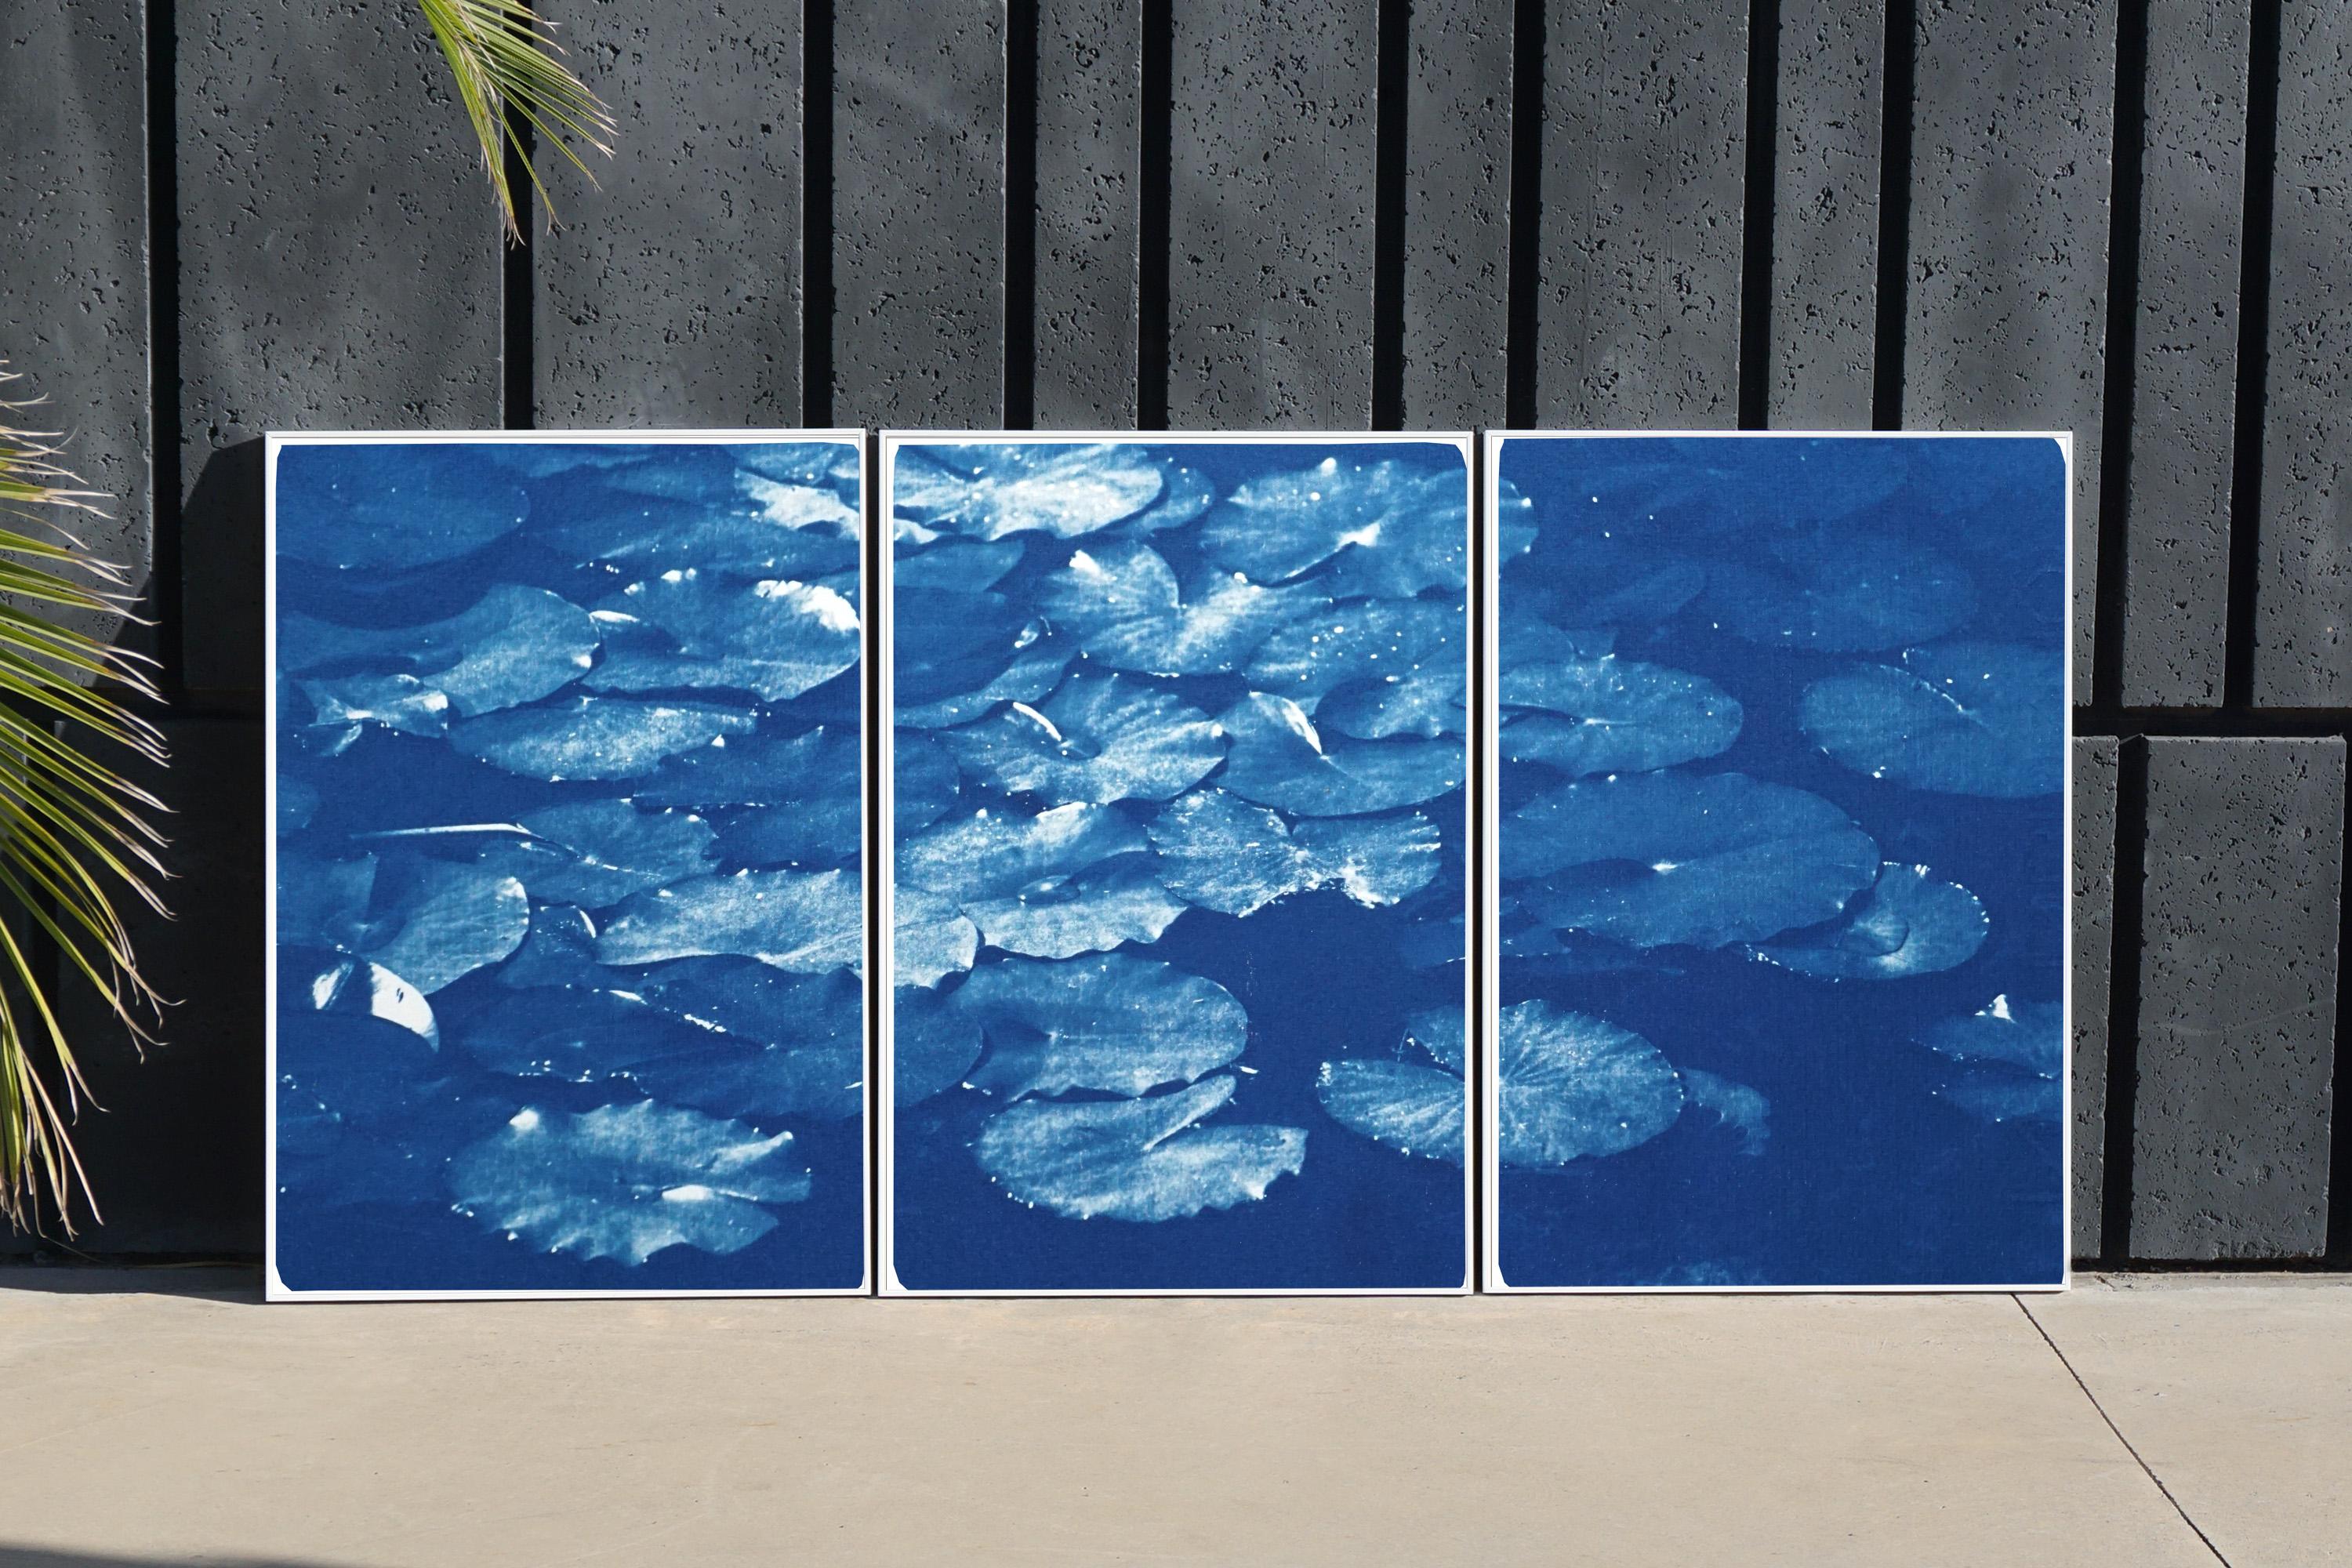 Lilypad Pond Triptych, Large Cyanotype on Watercolor Paper, Zen Blue Landscape - Painting by Kind of Cyan